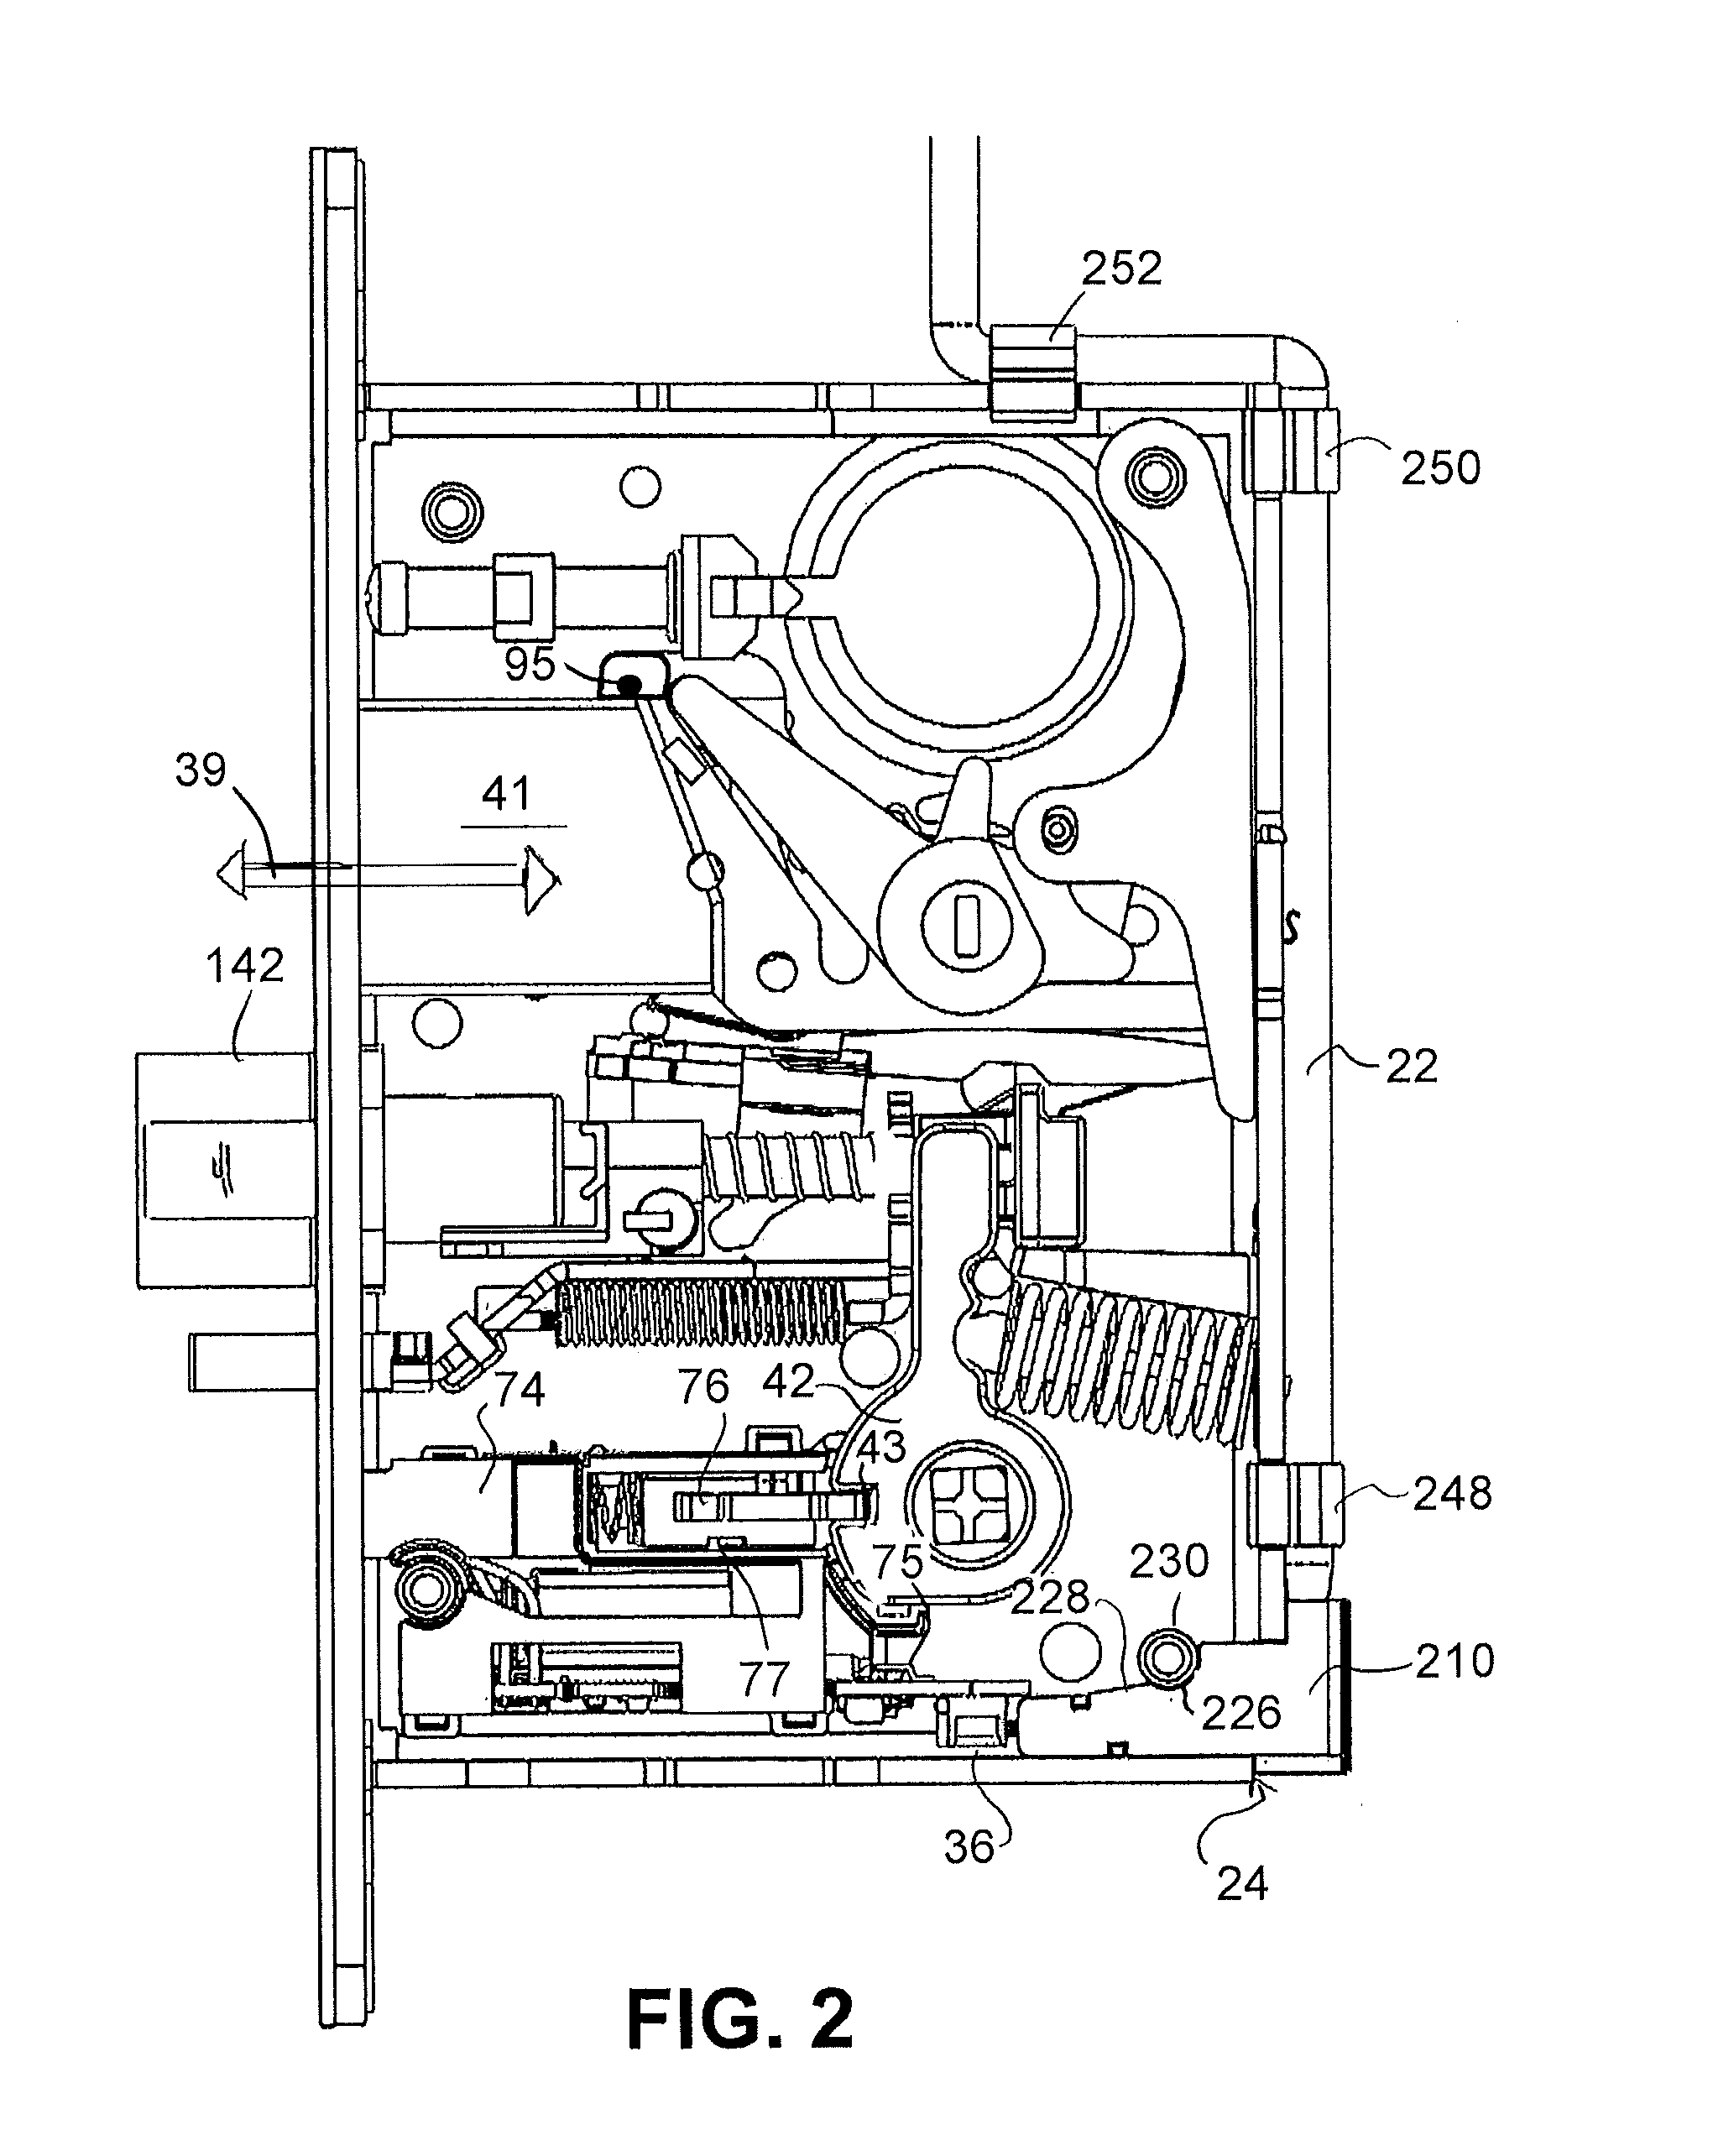 Locking device with configurable electrical connector key and internal circuit board for electronic door locks